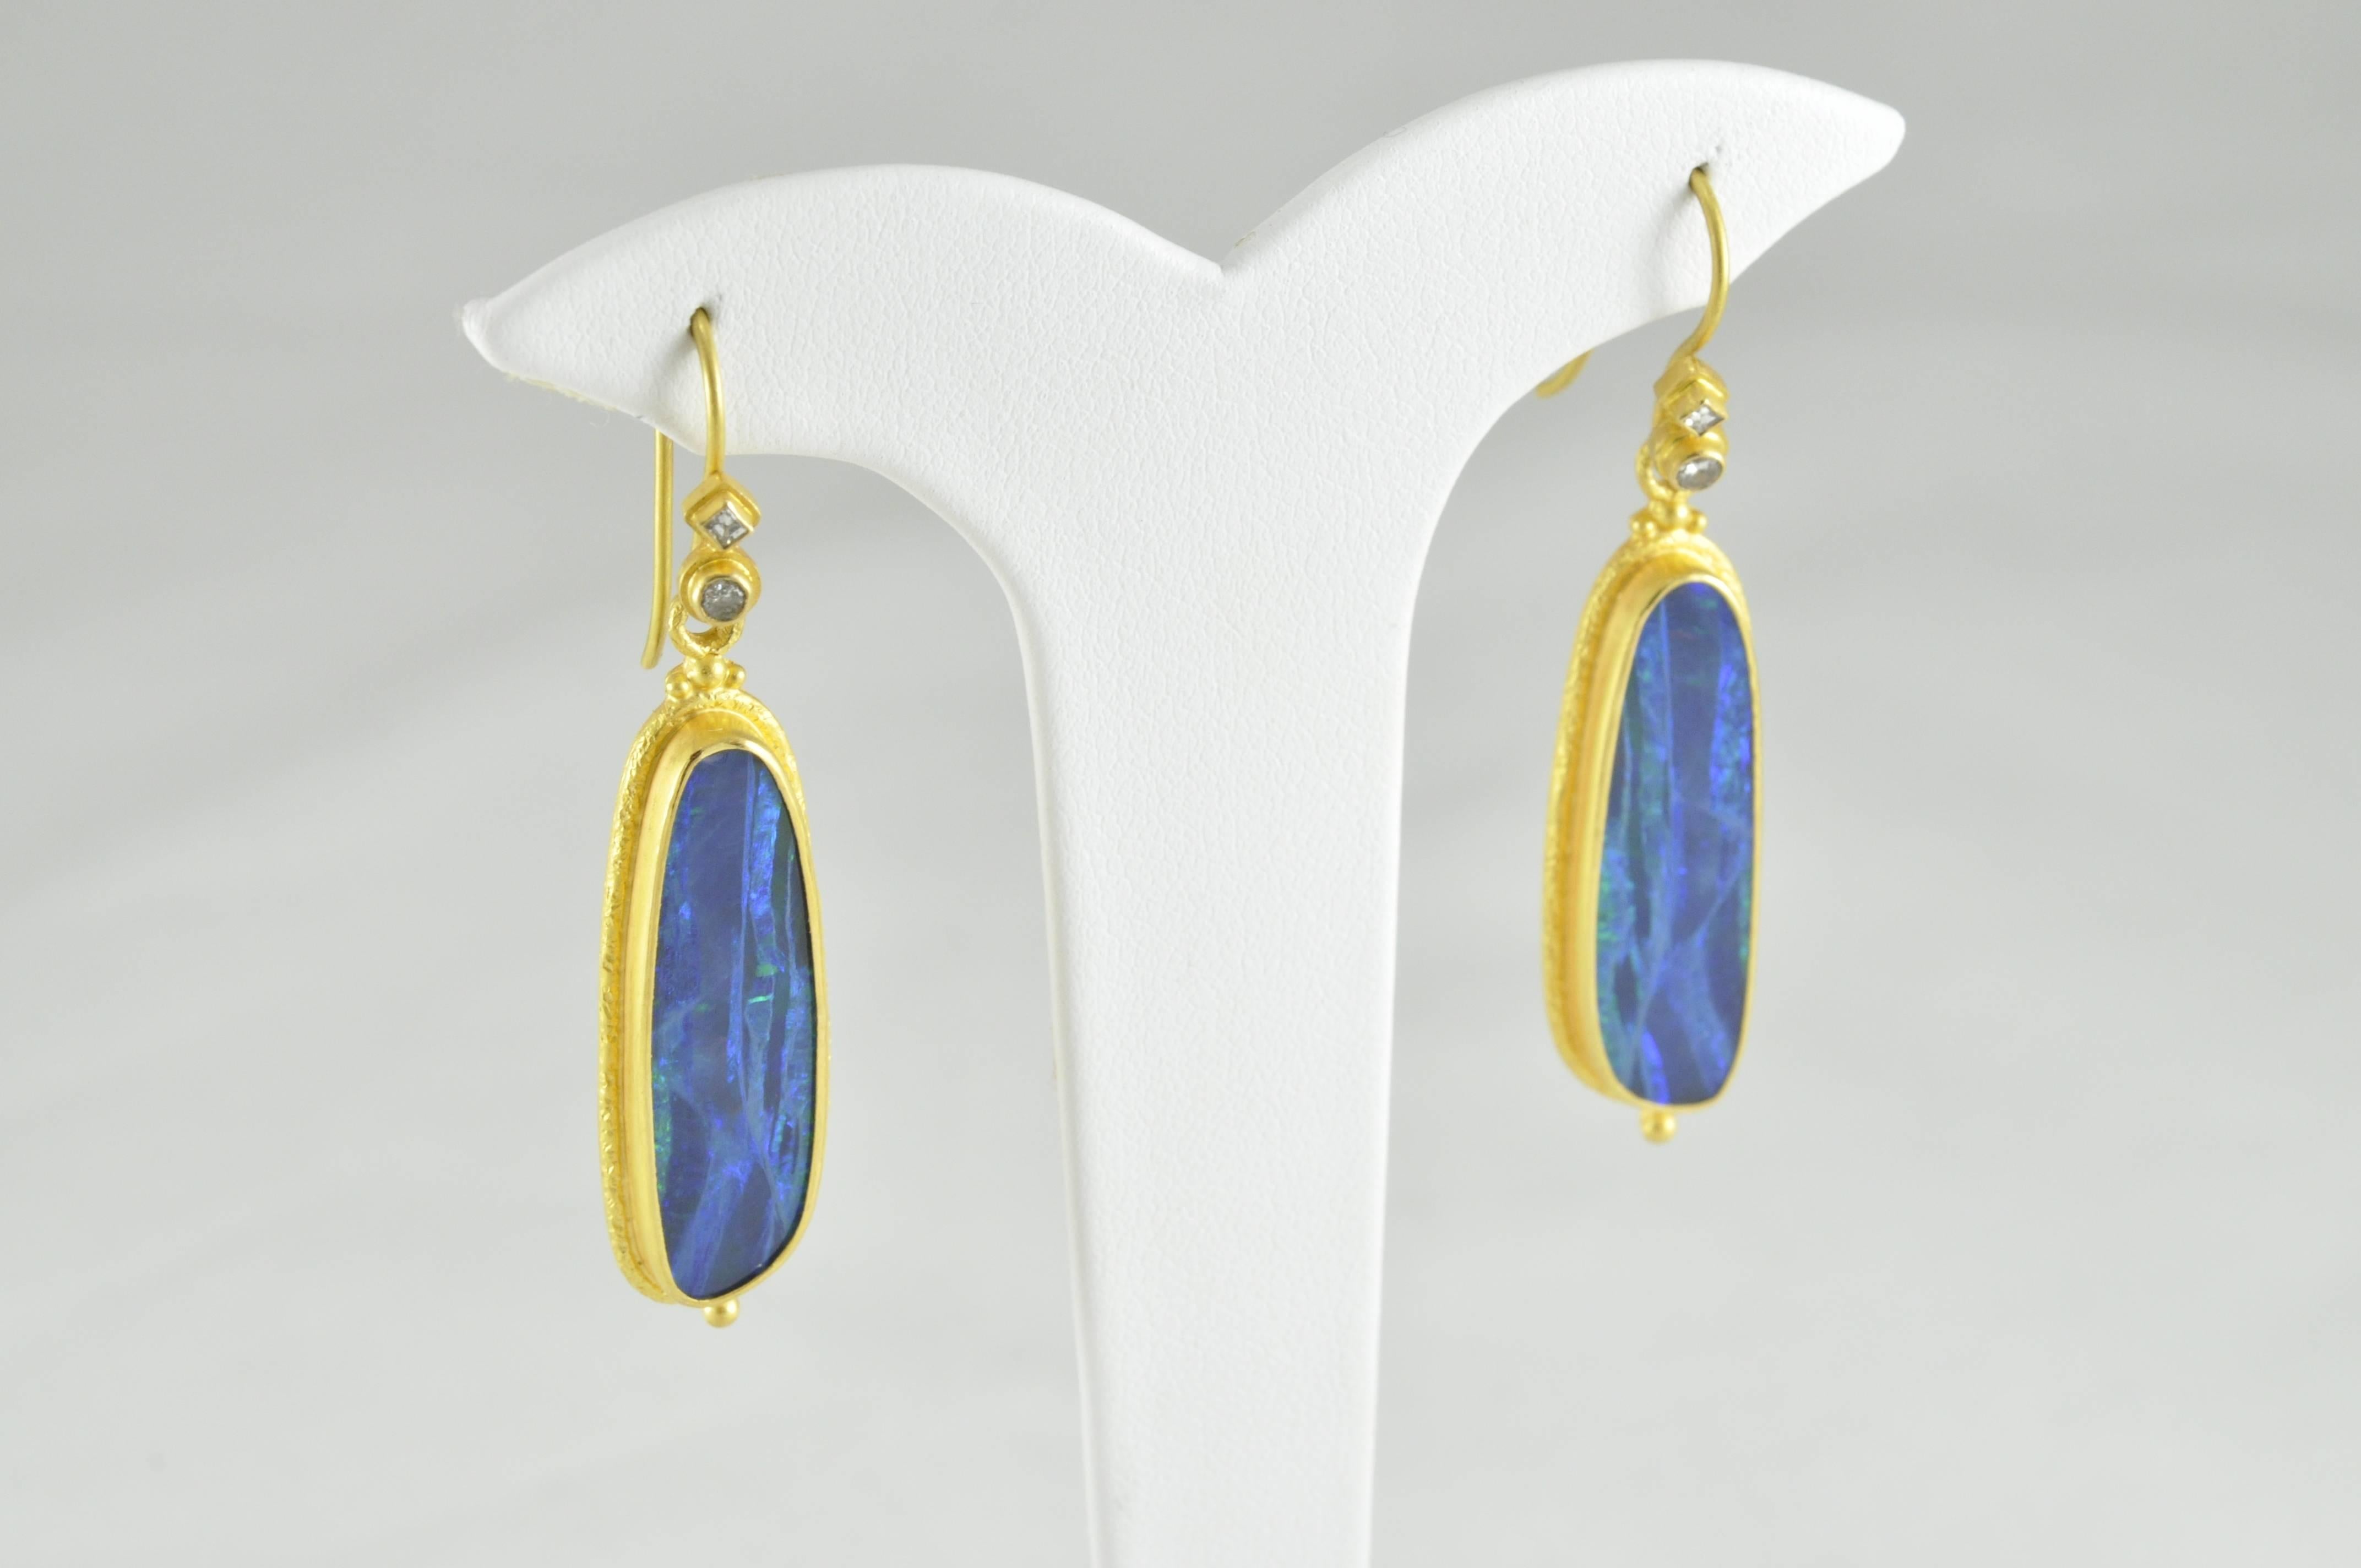 22K Gold Long Opal Doublet Dangle Drops with Diamond Tops.  Made by Kimarie Designs in Bali Indonesia.  